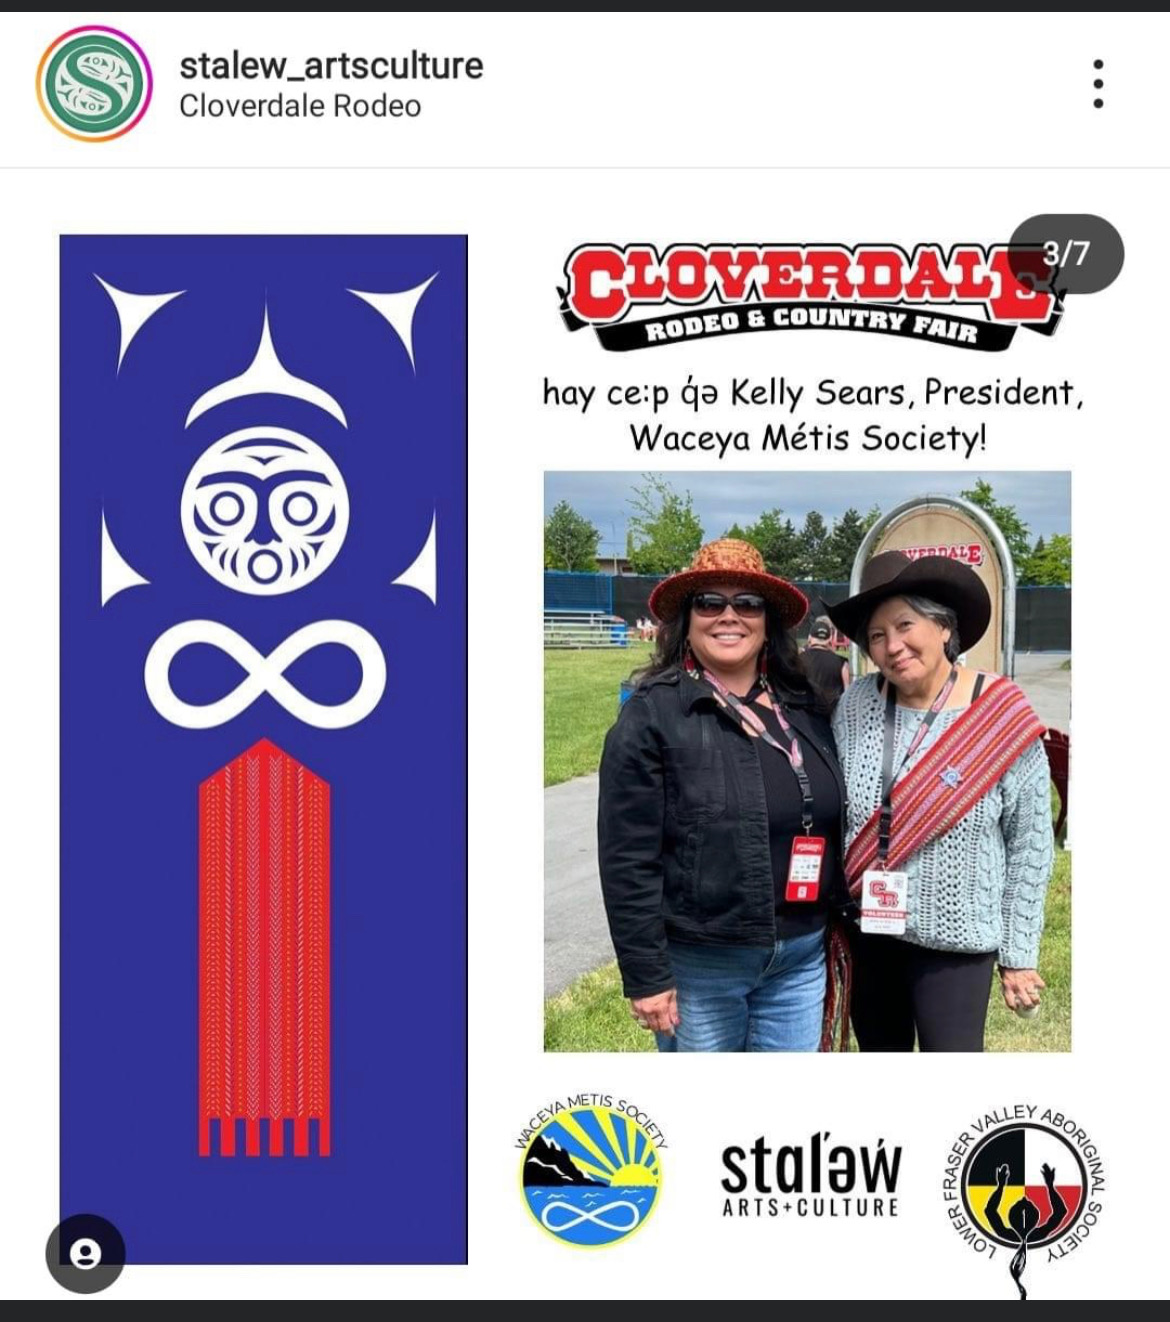 “Indigenous Village” at Cloverdale Rodeo - image